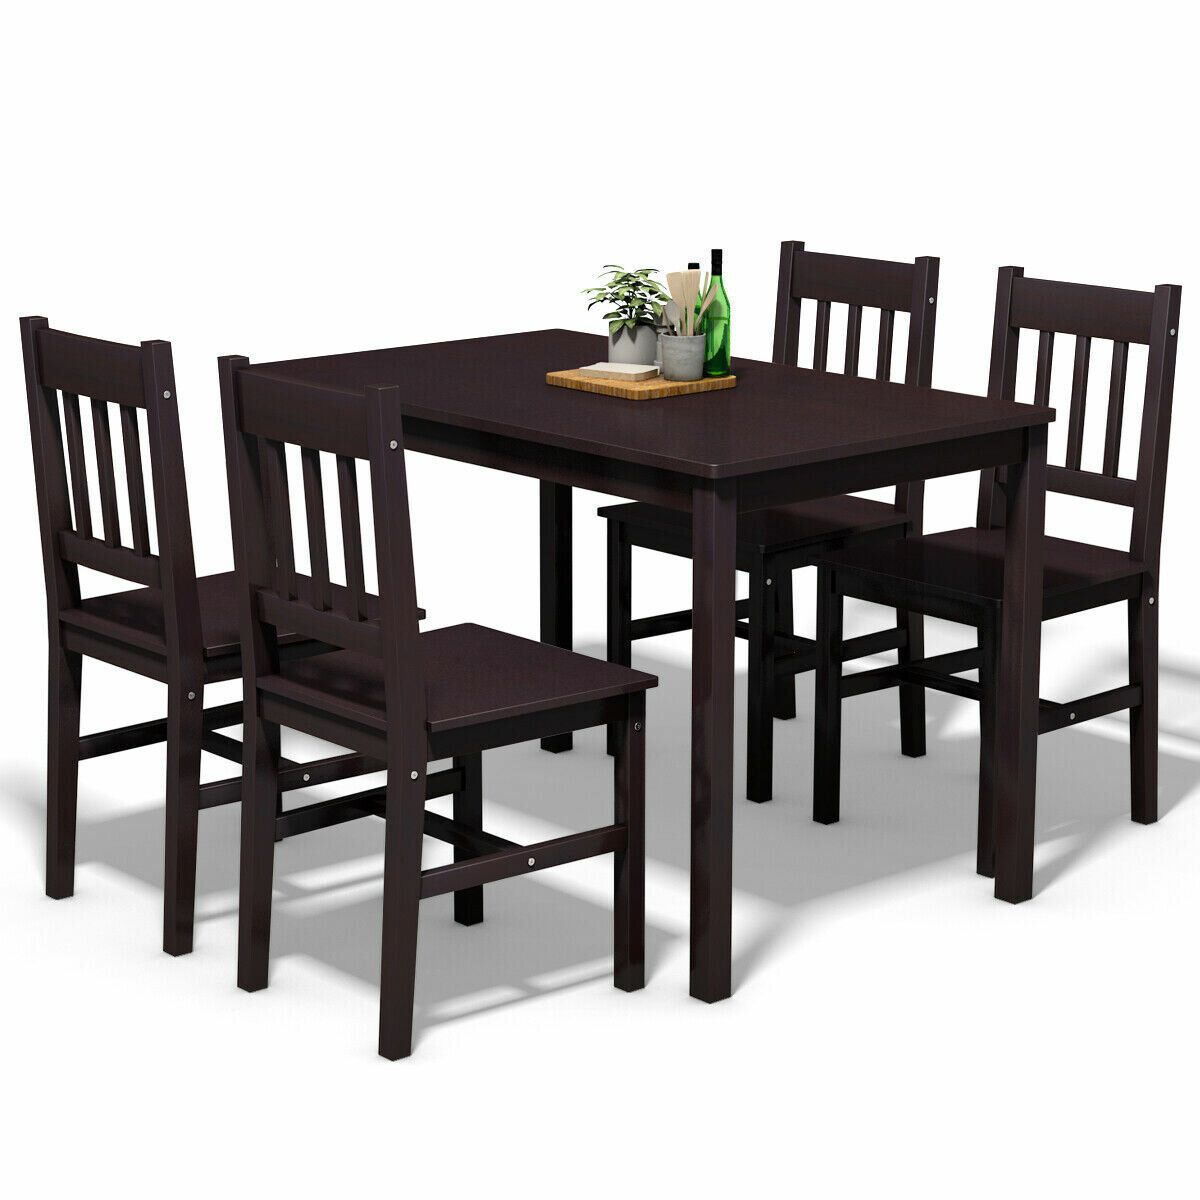 Sundberg 5 Piece Solid Wood Dining Set Within Newest Miskell 5 Piece Dining Sets (View 6 of 20)